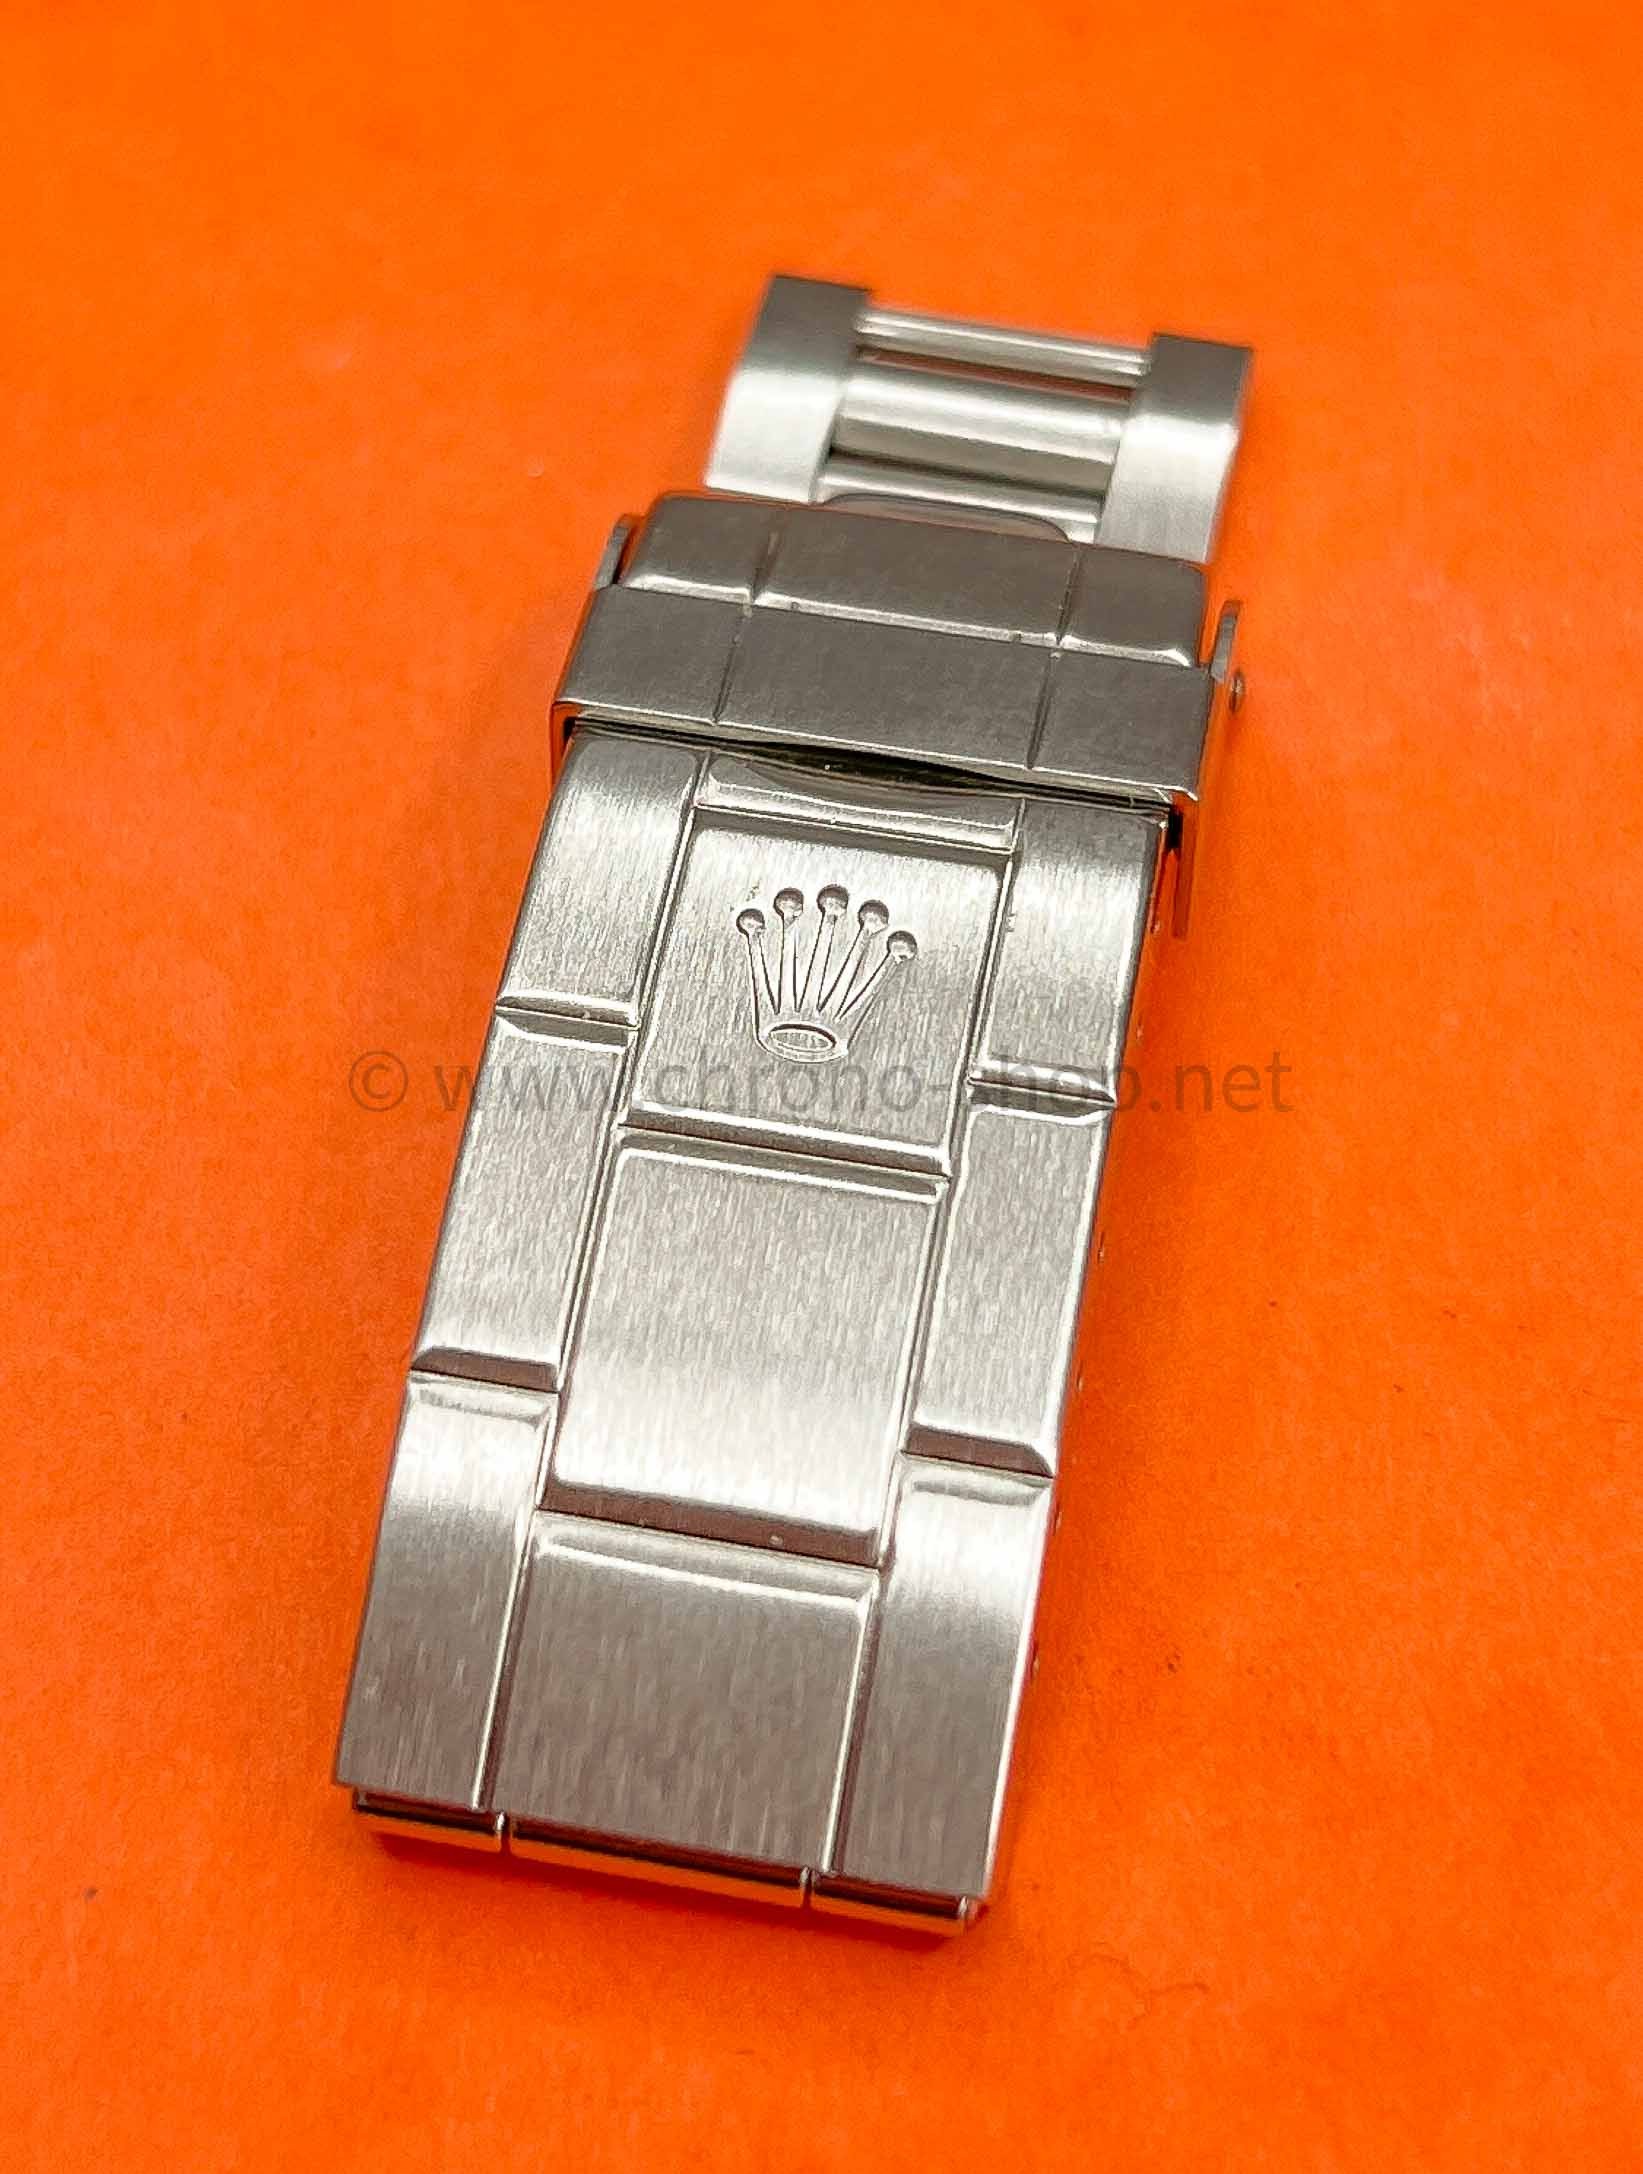 Rolex Submariner 20mm Watches Divers Extension Folding Link... for $443 for  sale from a Trusted Seller on Chrono24